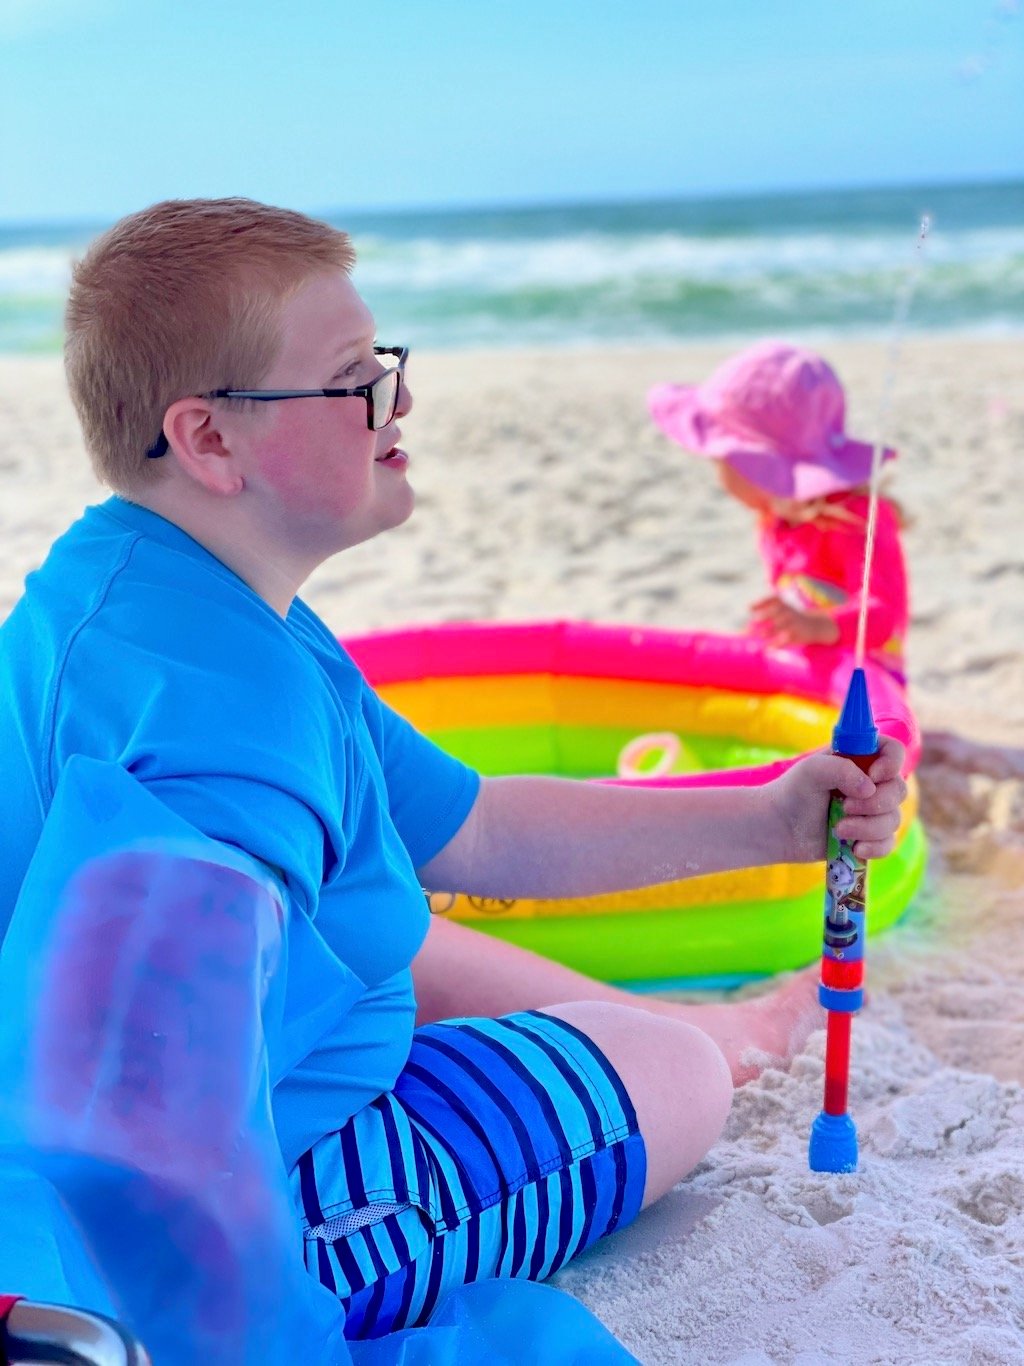 child with a full arm cast at the beach - cast cover